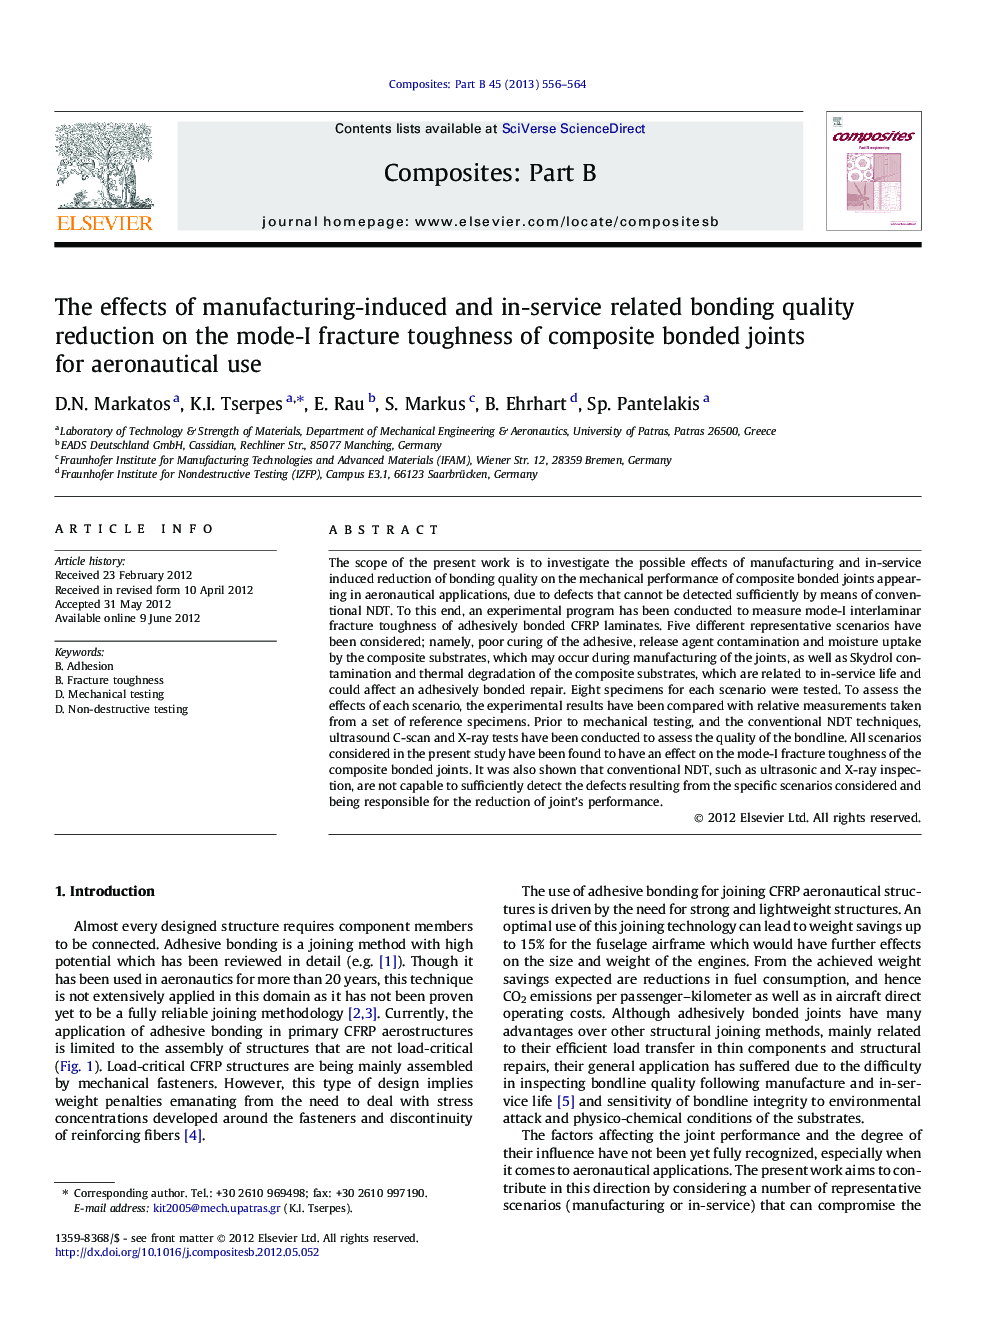 The effects of manufacturing-induced and in-service related bonding quality reduction on the mode-I fracture toughness of composite bonded joints for aeronautical use